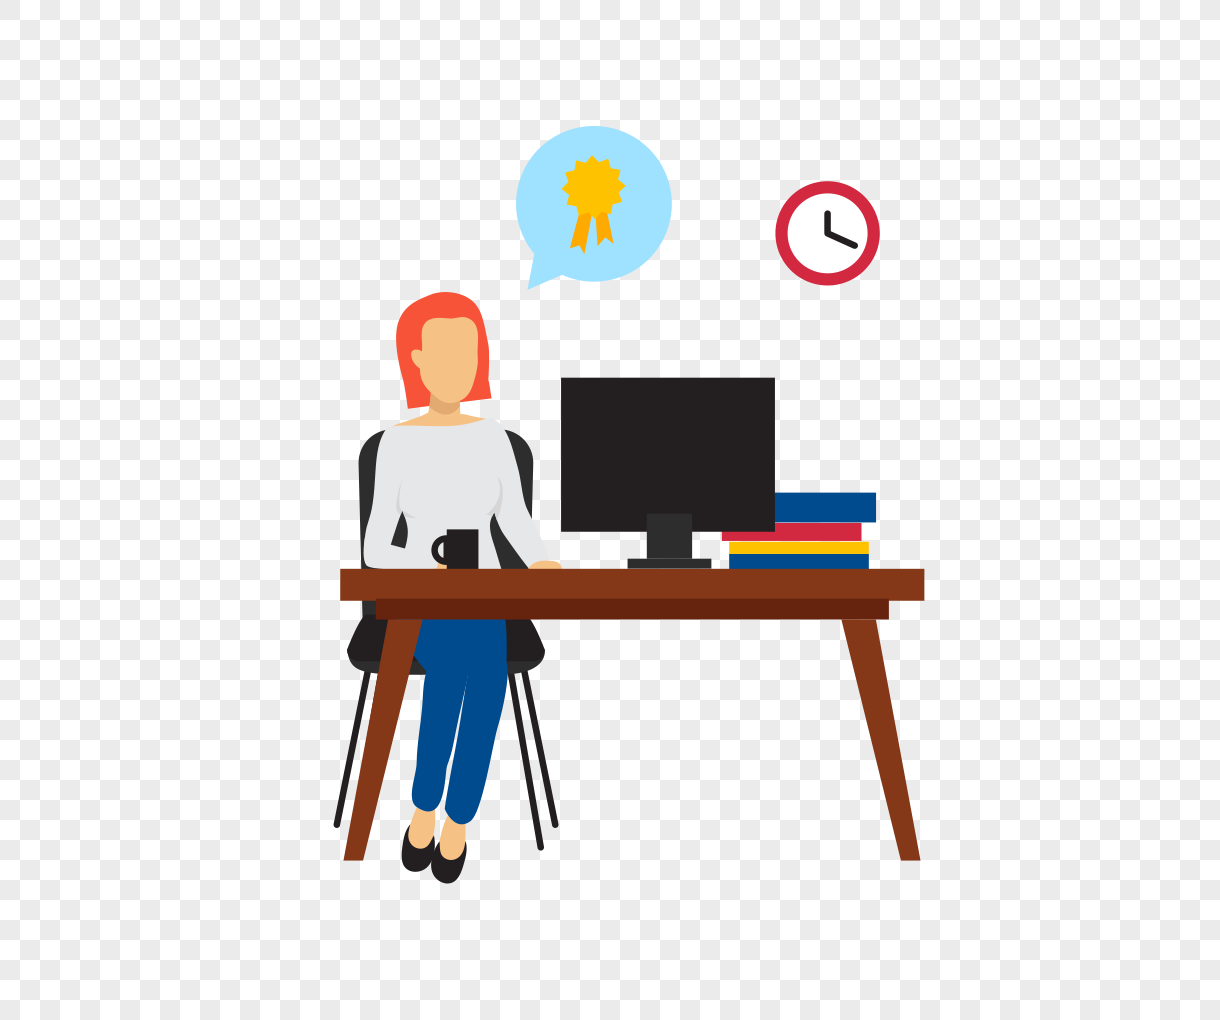 Workplace cartoon vector characters png image picture free 